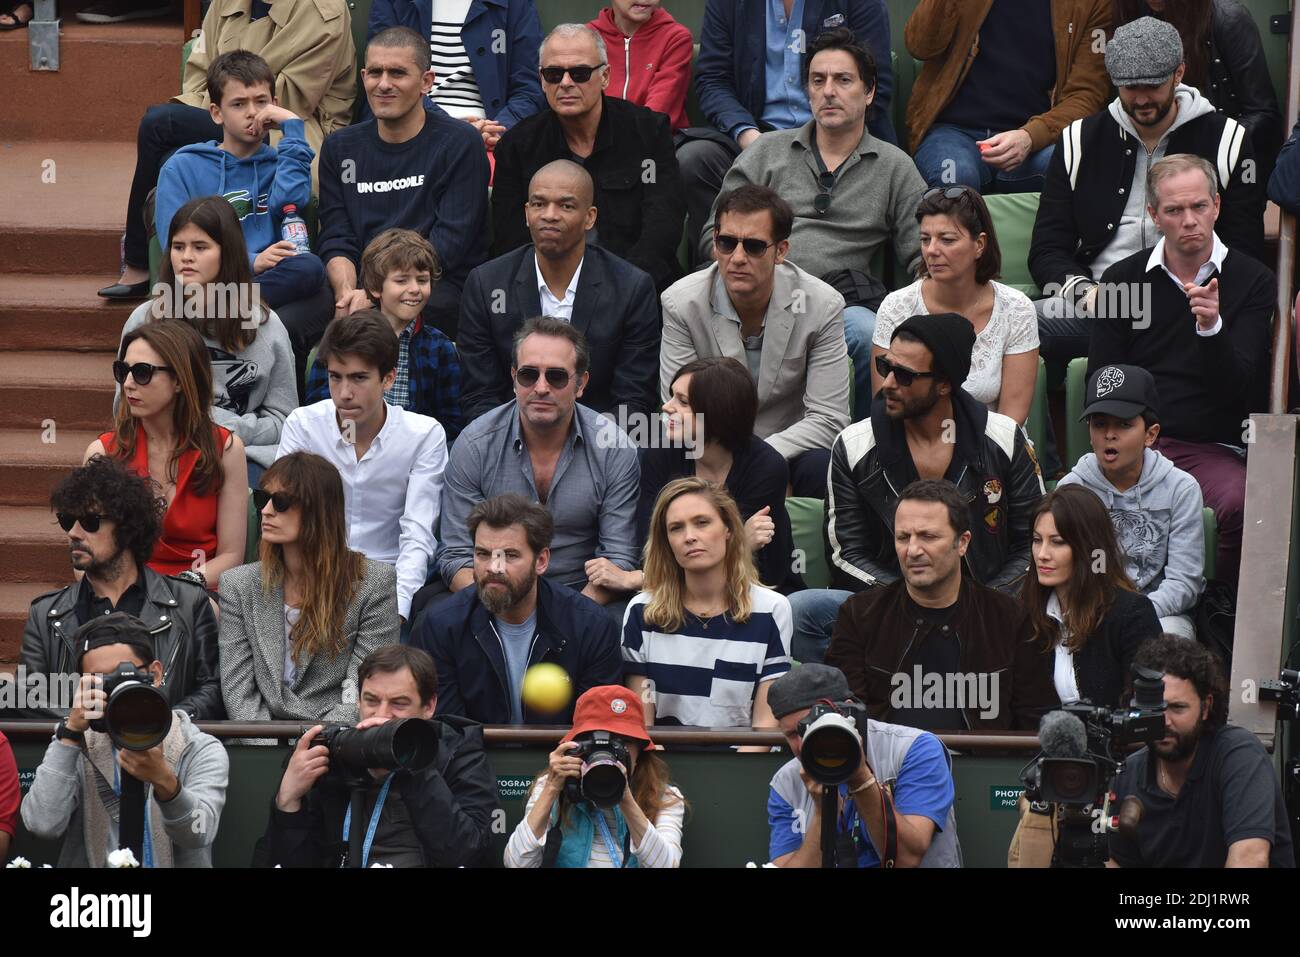 Actor Guillaume Gallienne, actor Yvan Attal, chef Cyril Lignac, actor Clive Owen, journalist Julien Arnaud, Elsa Zylberstein, actor Jean Dujardin, Nathalie Pechalat, singer Maxime Nucci, model Caroline de Maigret and her companion musician Yarol Poupaud, actors Clovis Cornillac and his wife Lilou Fogli, TV Host Arthur Essebag and Mareva Galanter attend Day Fifteen, Men single's Final of the 2016 French Tennis Open at Roland Garros on June 5, 2016 in Paris, France. Photo by Laurent Zabulon/ABACAPRESS.COM Stock Photo